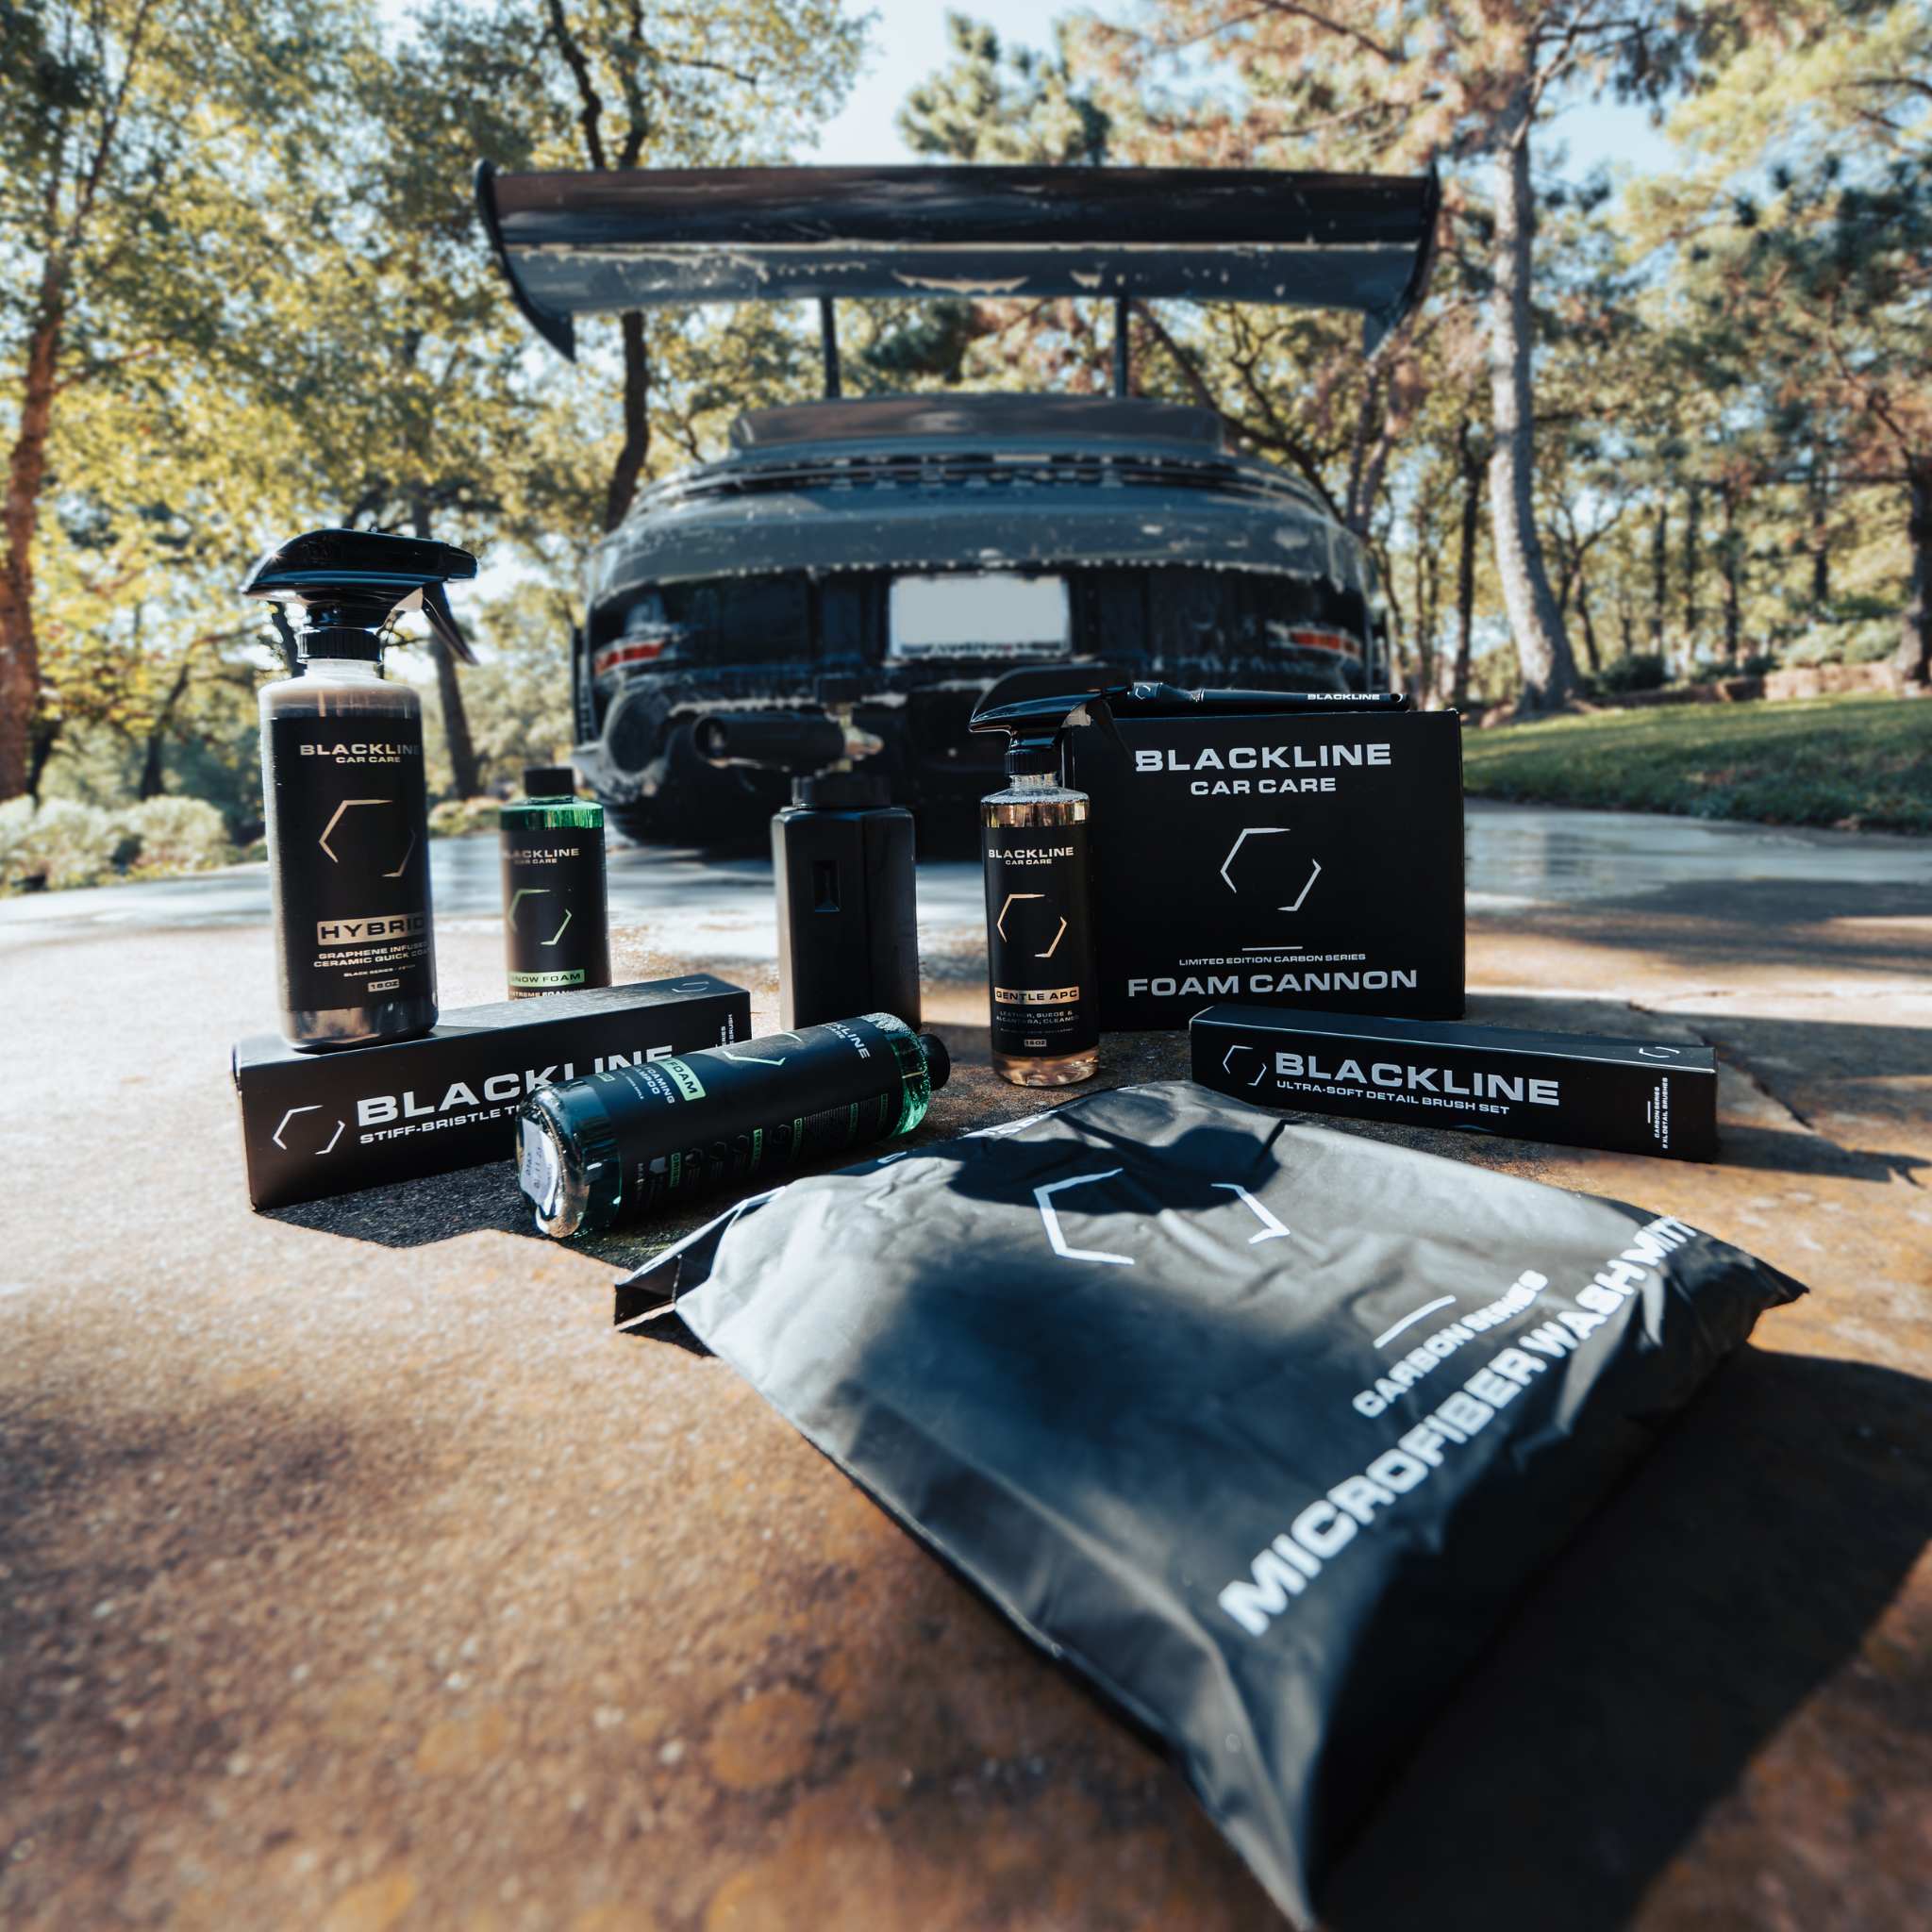 Blackline Car Care go check them out and grab you a drying towel! The